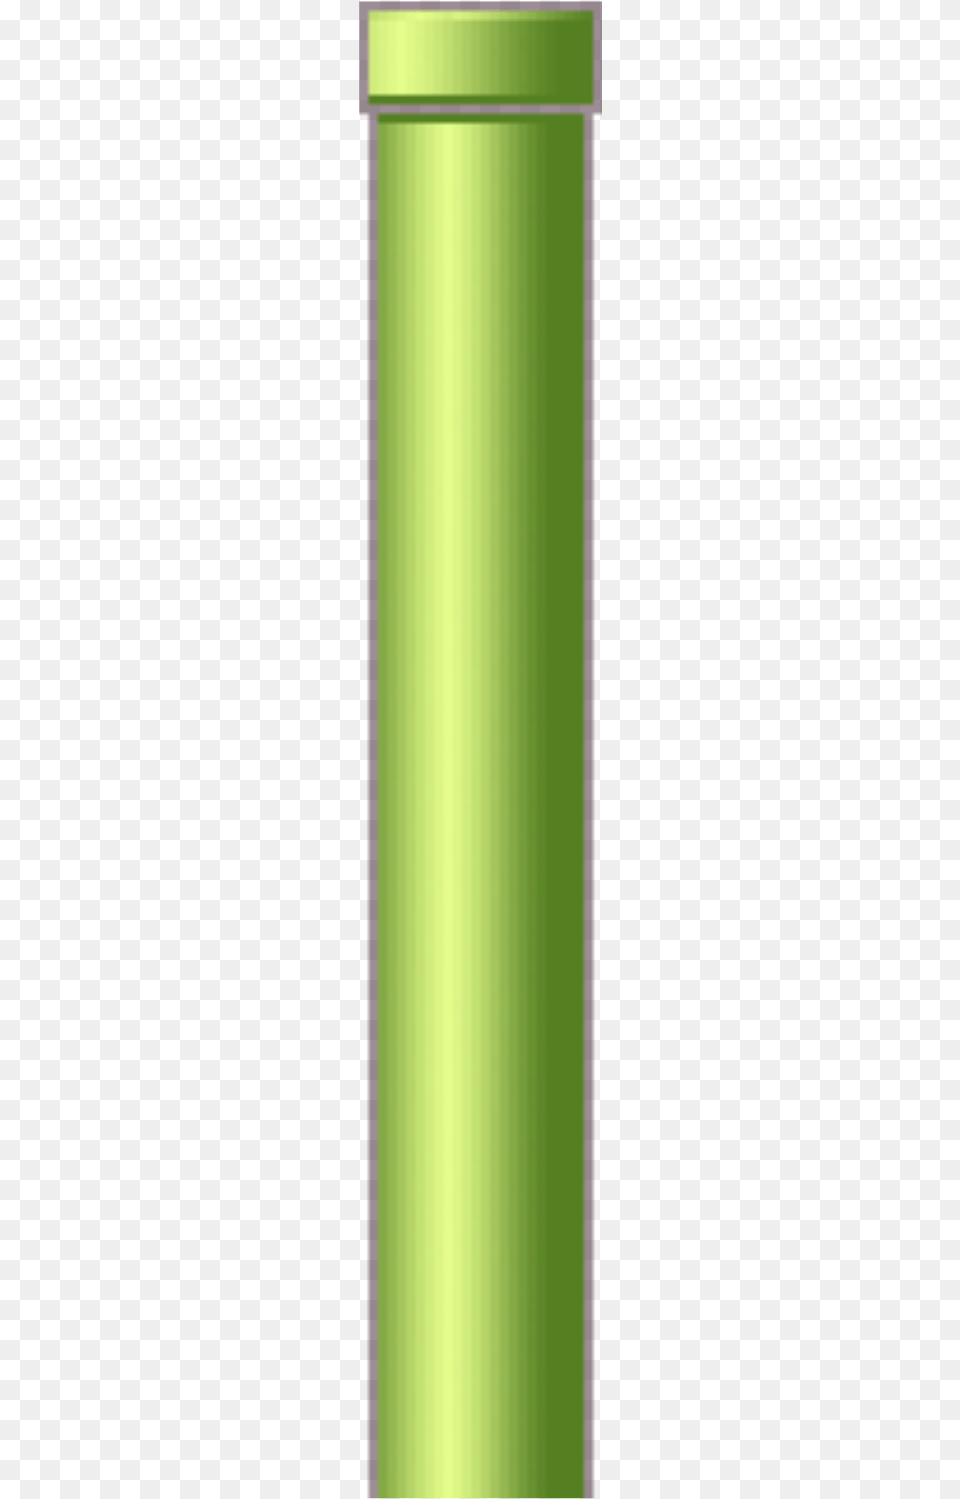 Flappy Bird Pipes Bottle, Green Free Transparent Png